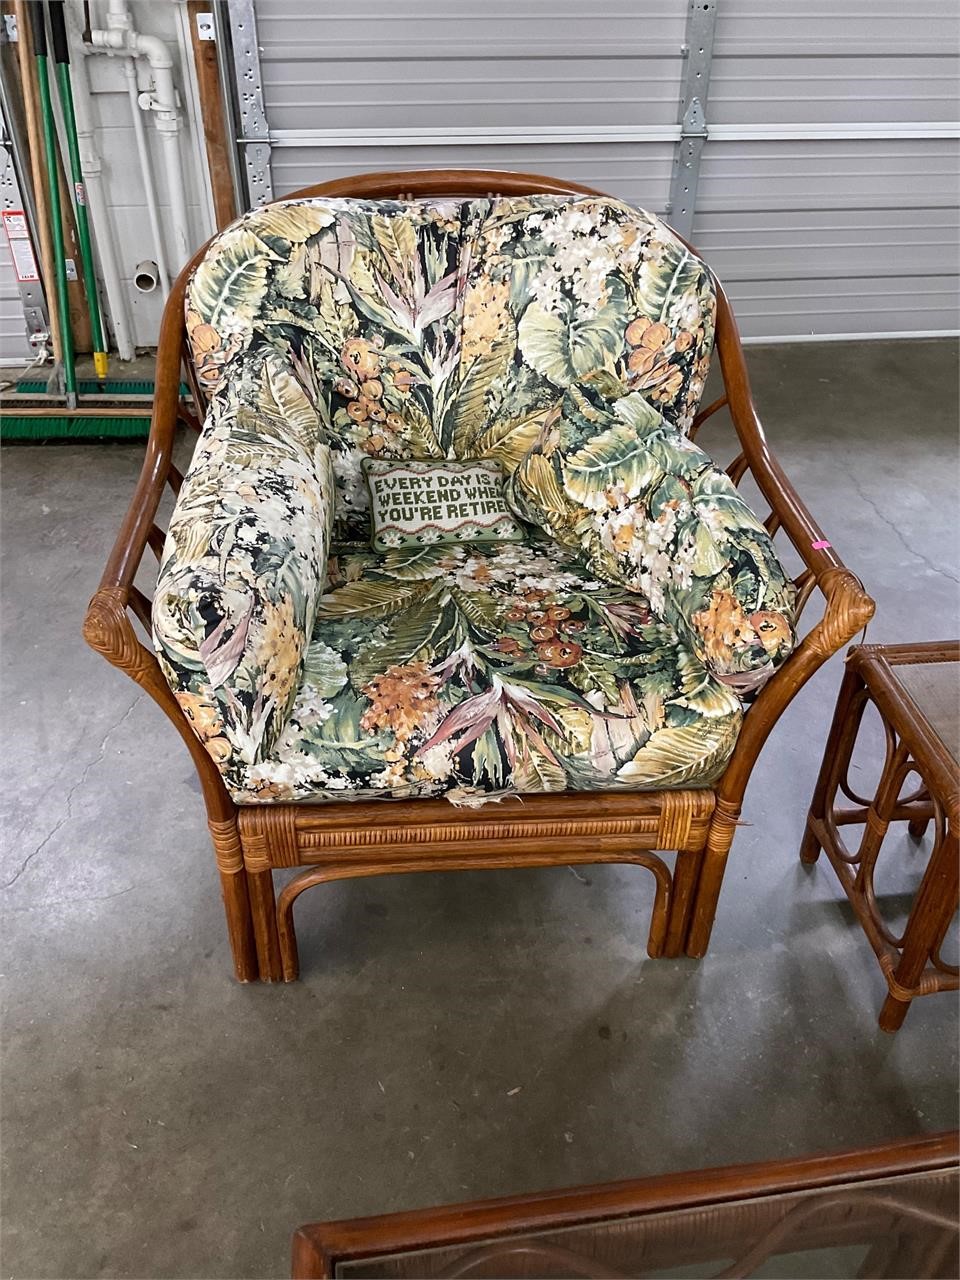 Estate and Consignment 4/28